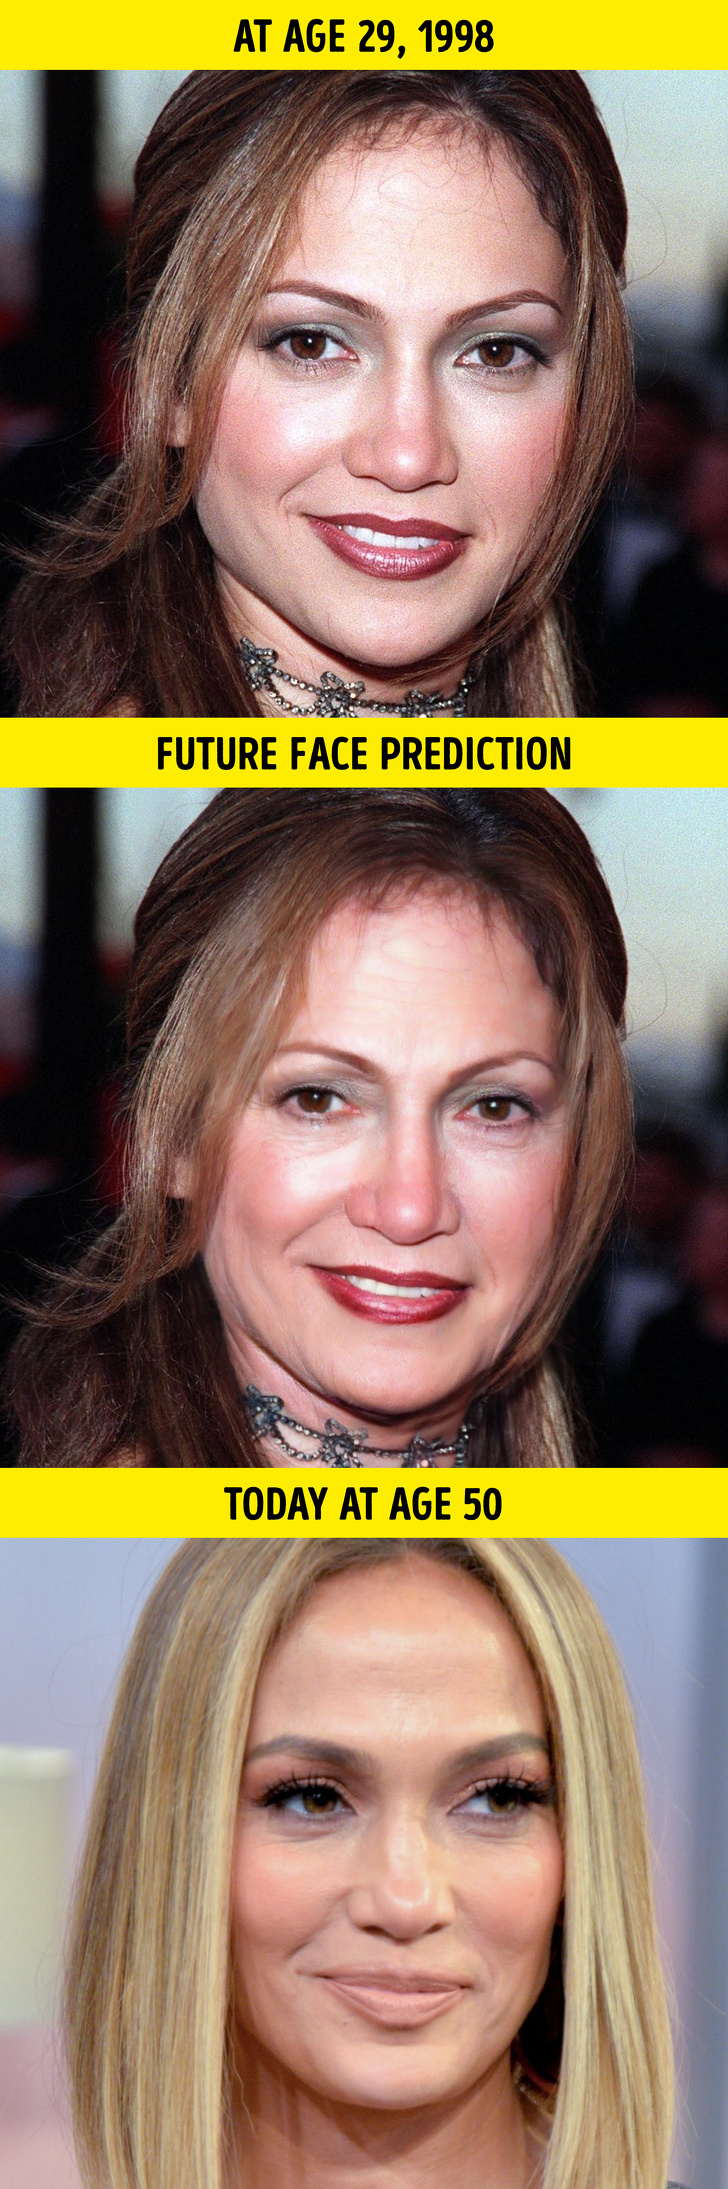 A Plastic Surgeon Reveals How 10 Celebrities Would Look If They Aged Like Average People